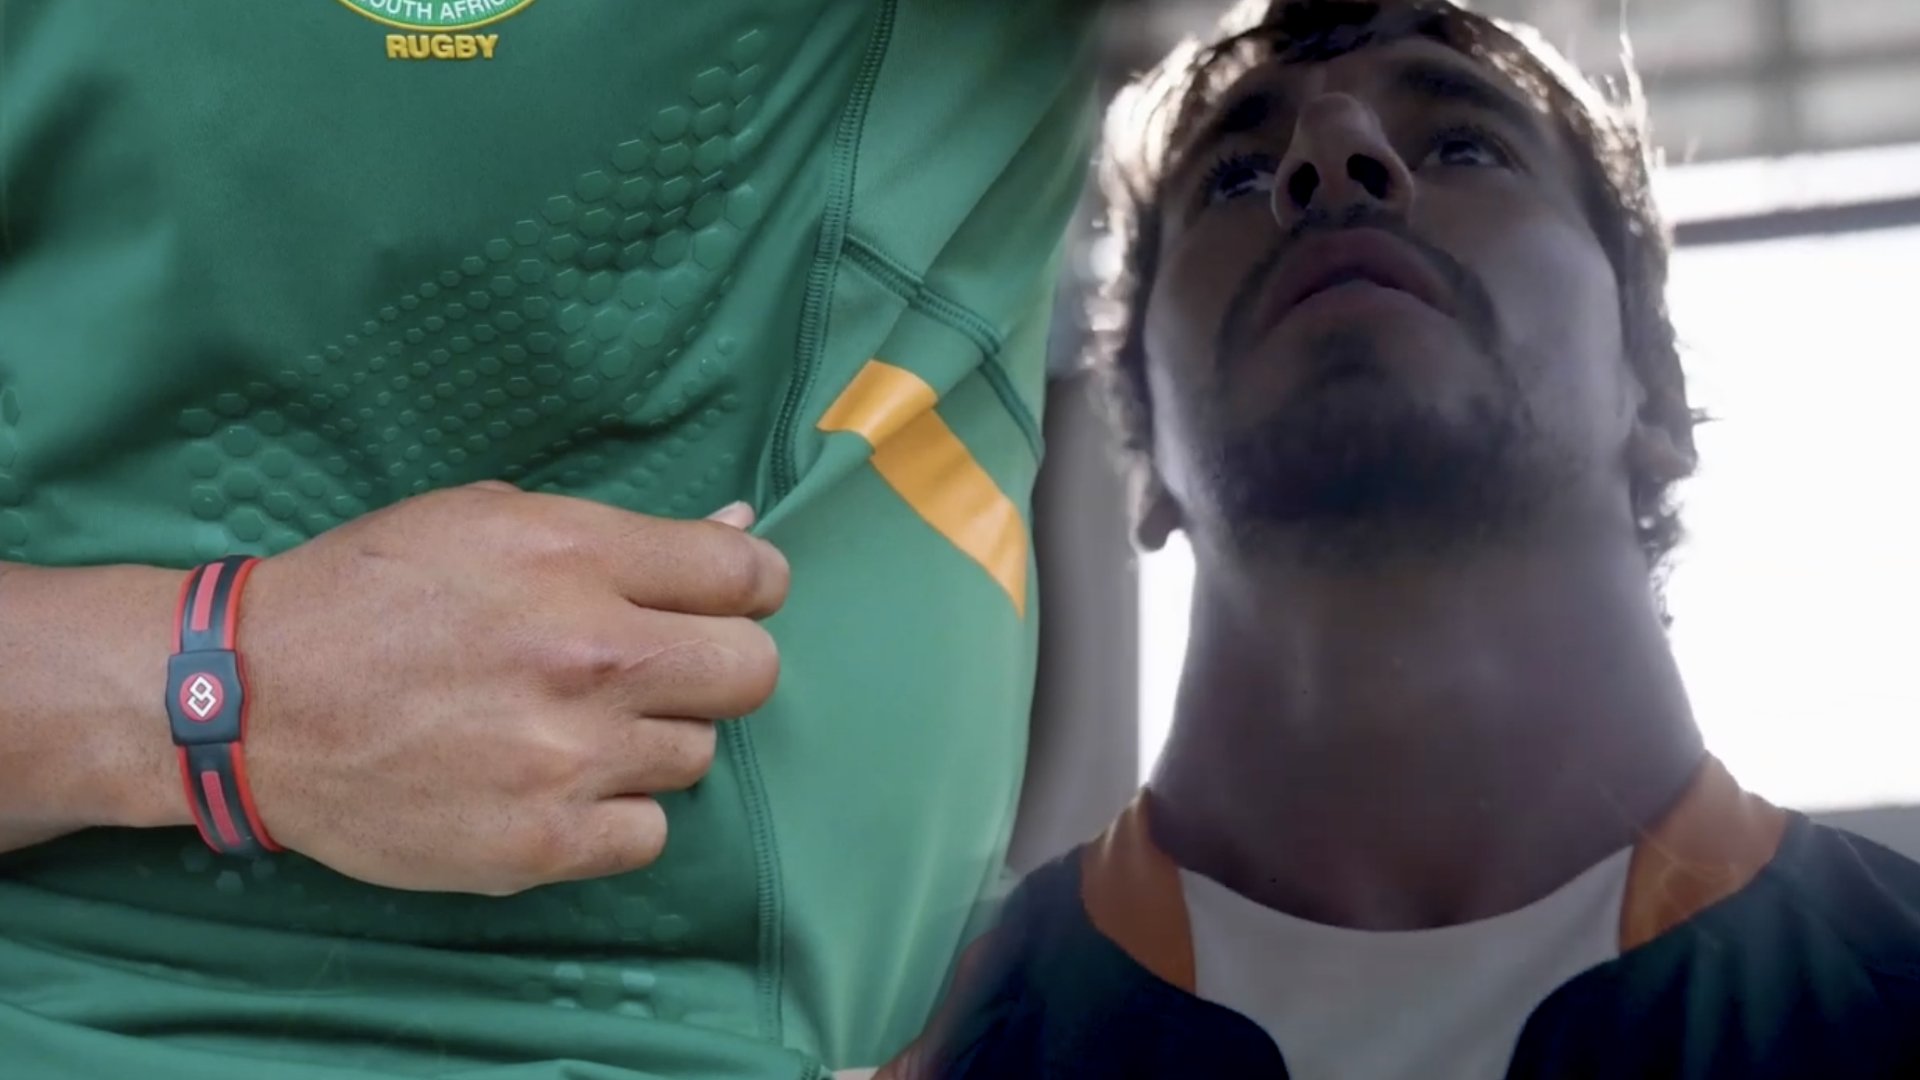 WATCH: Springboks officially reveal their new World Cup kit which we think is GORGEOUS